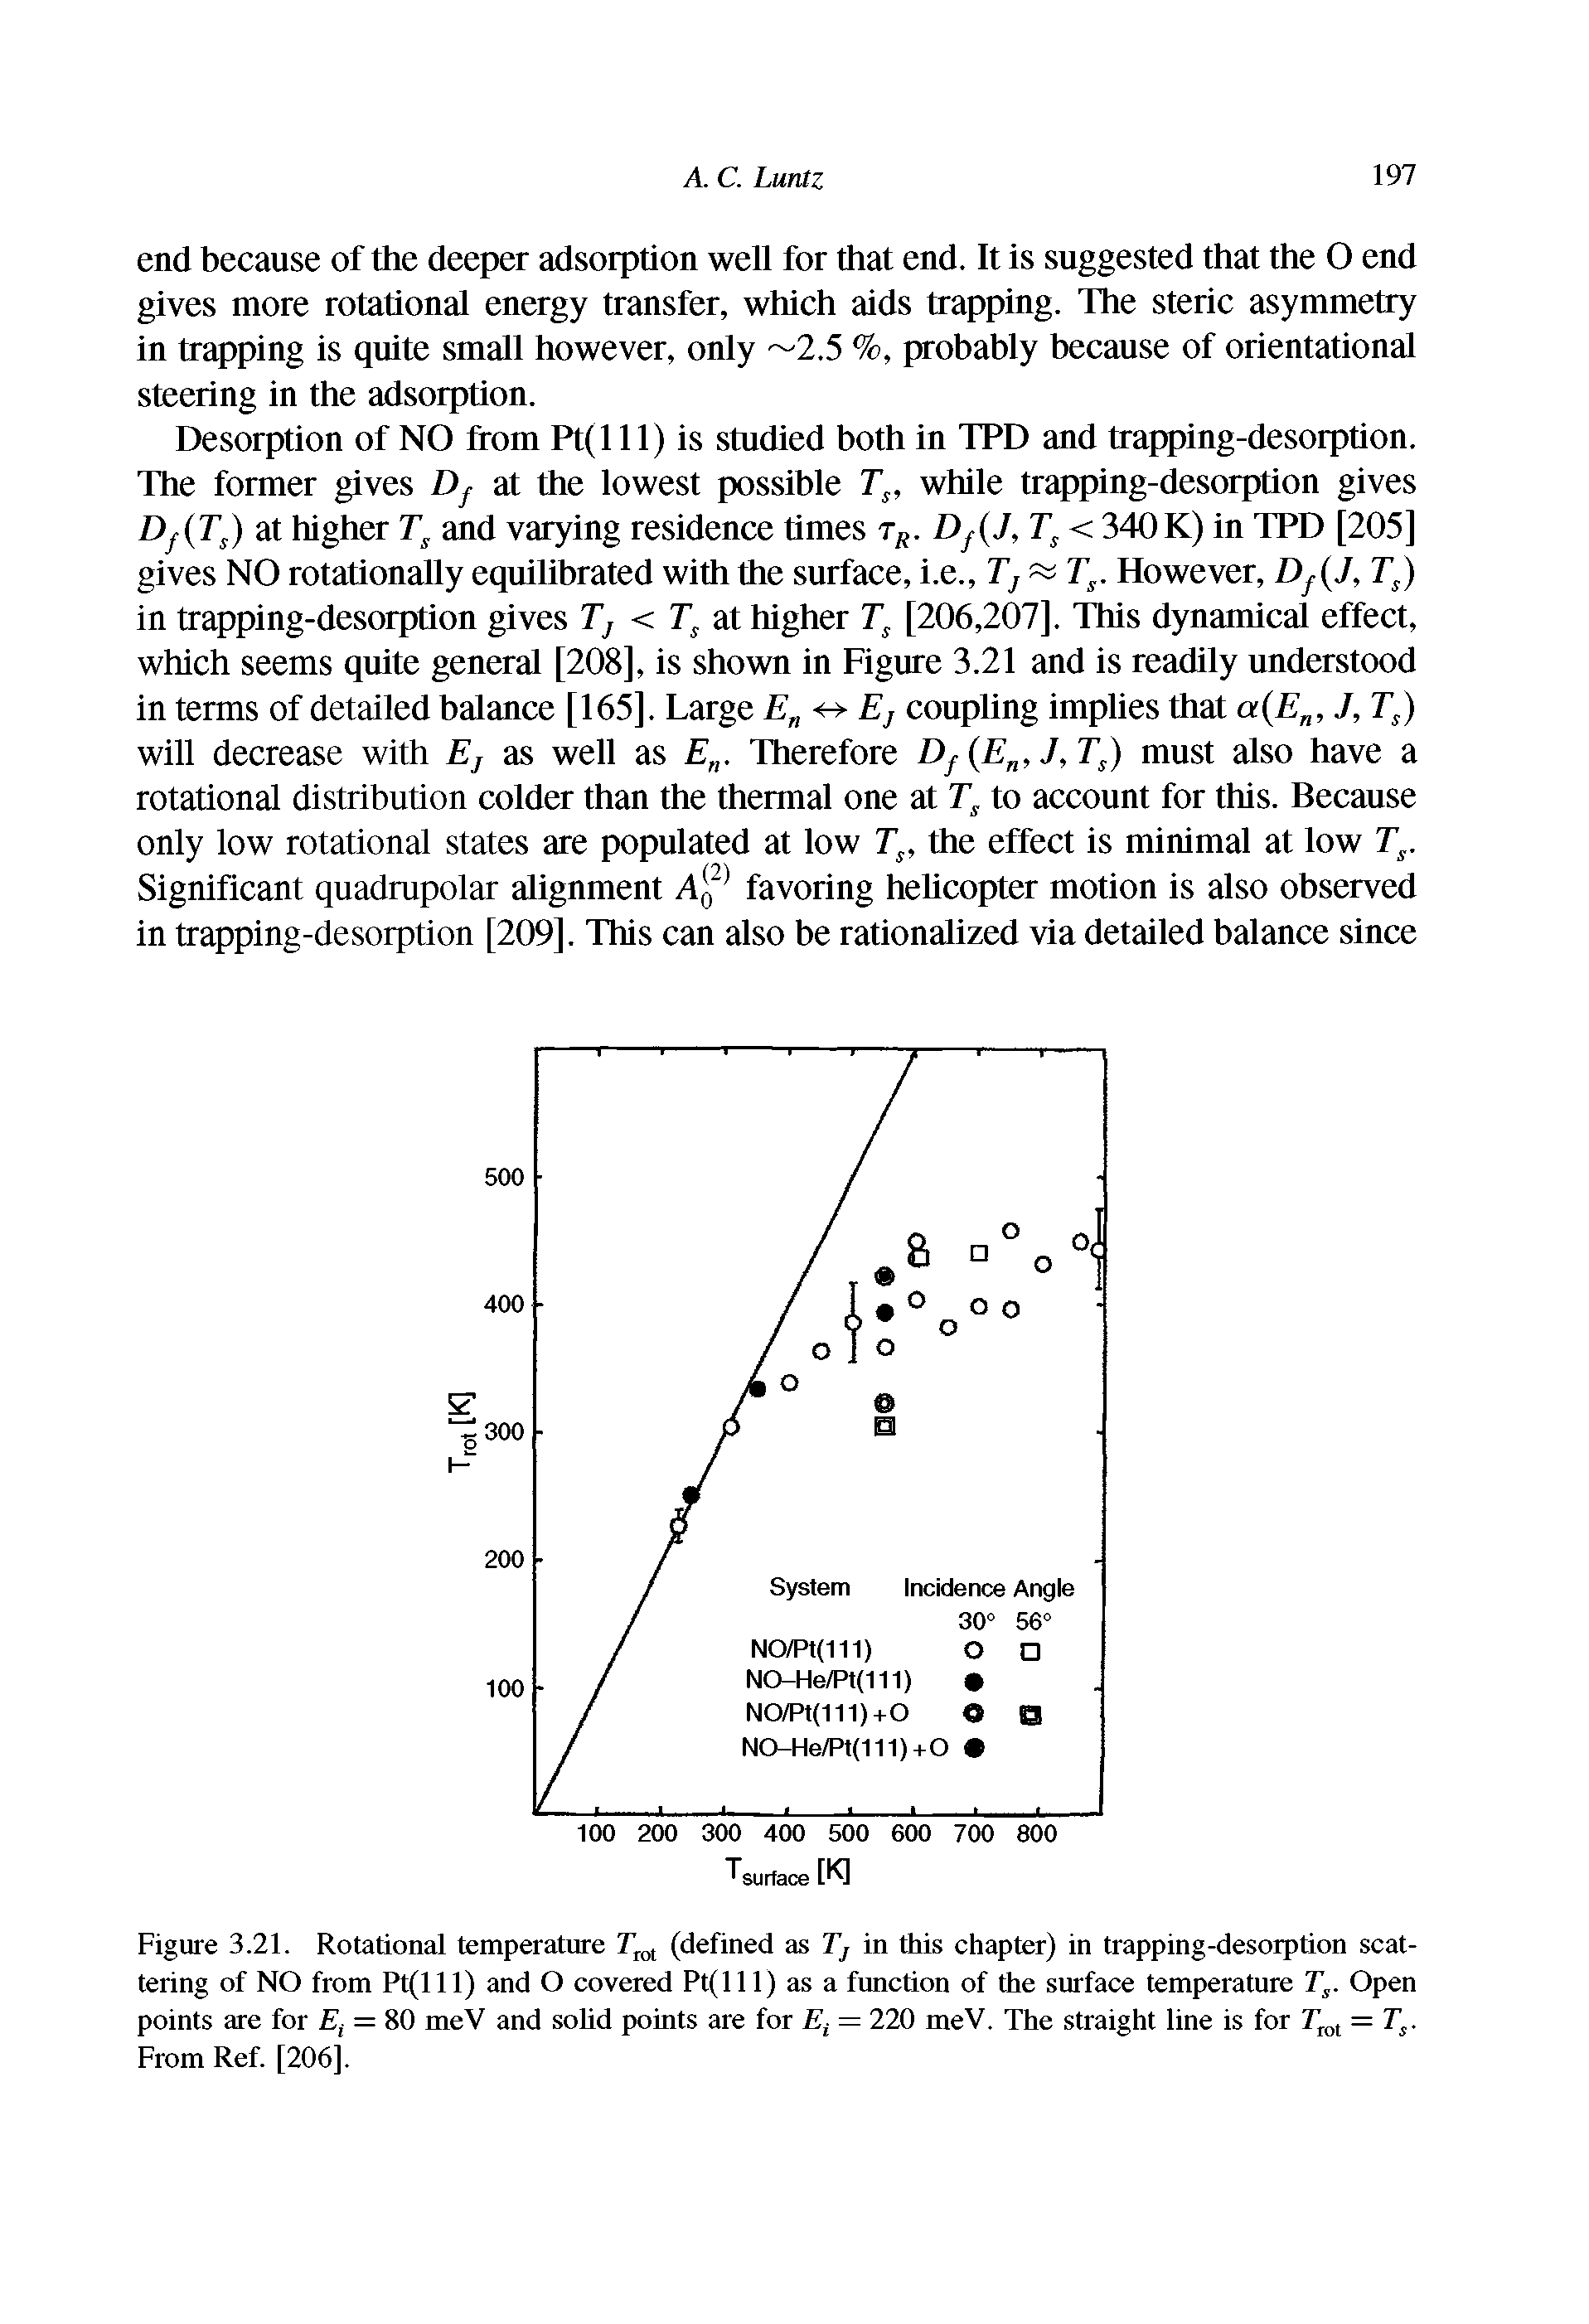 Figure 3.21. Rotational temperature 7 rot (defined as T in this chapter) in trapping-desorption scattering of NO from Pt(l 11) and covered Pt(lll) as a function of the surface temperature Ts. Open points are for Et = 80 meV and solid points are for Et = 220 meV. The straight line is for 7rot = Ts. From Ref. [206].